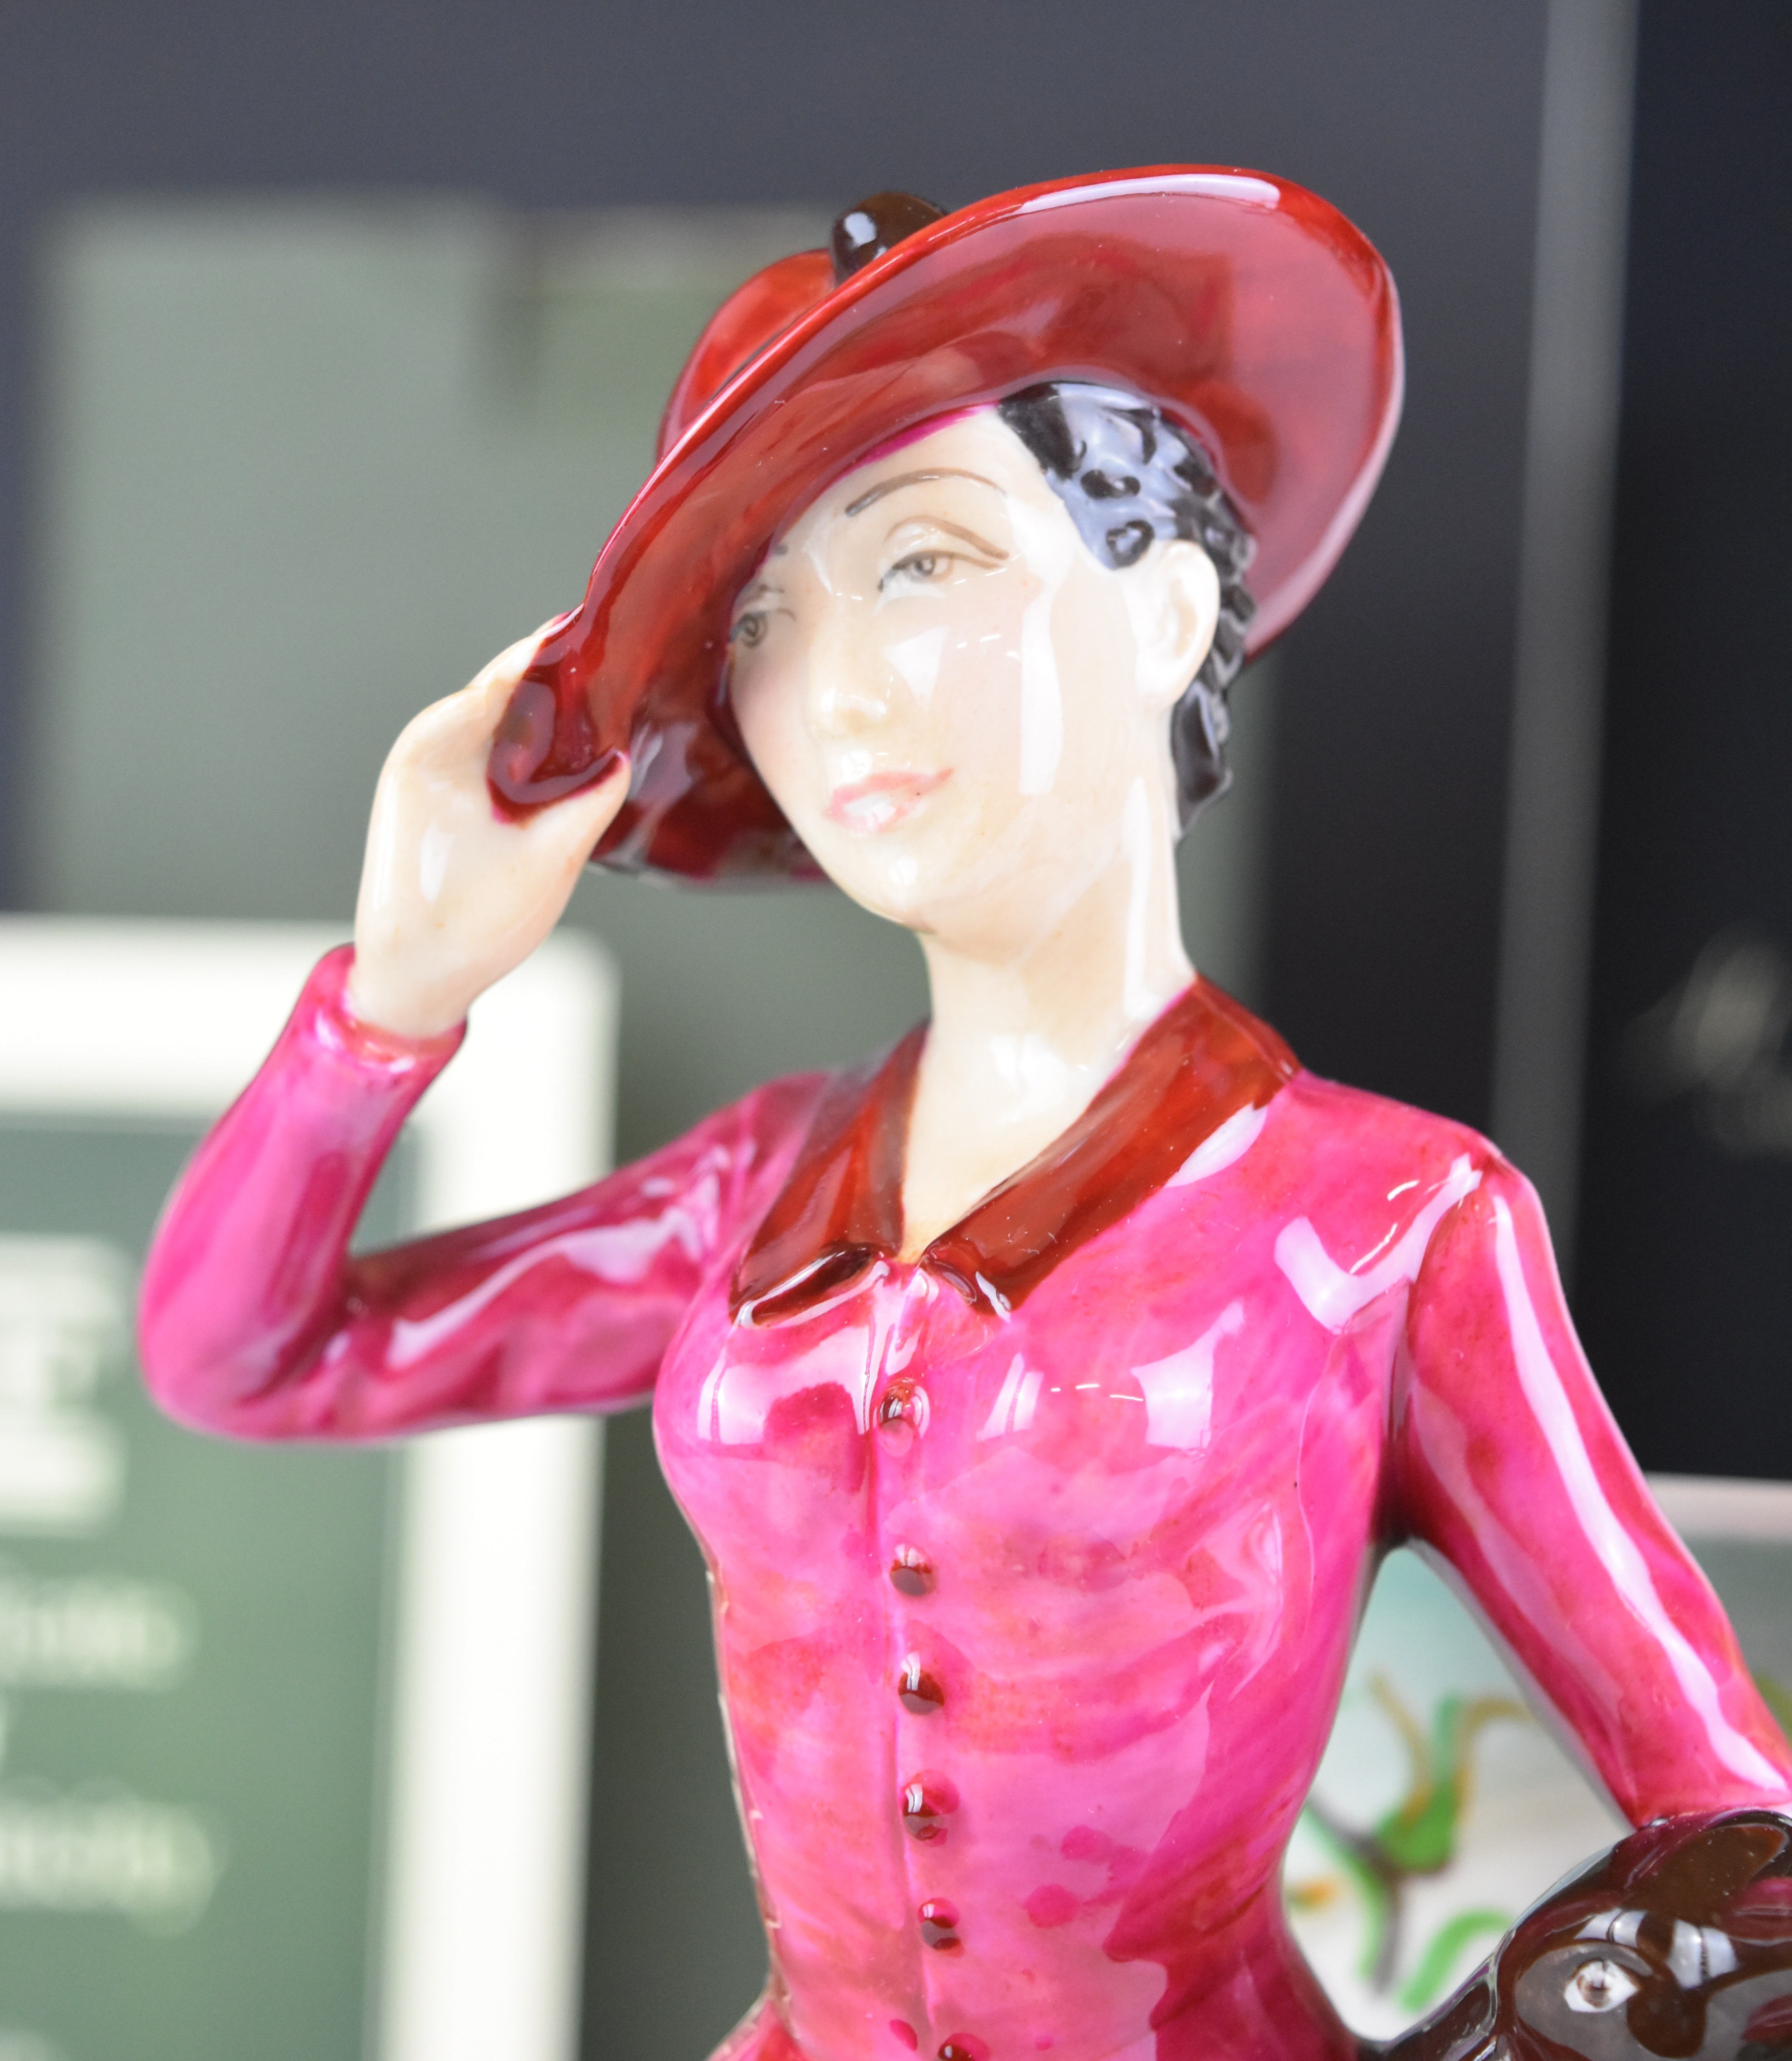 Kevin Francis limited edition figure of Susie Cooper and a Coalport 'In Love' figure, tallest 30cm - Image 3 of 5